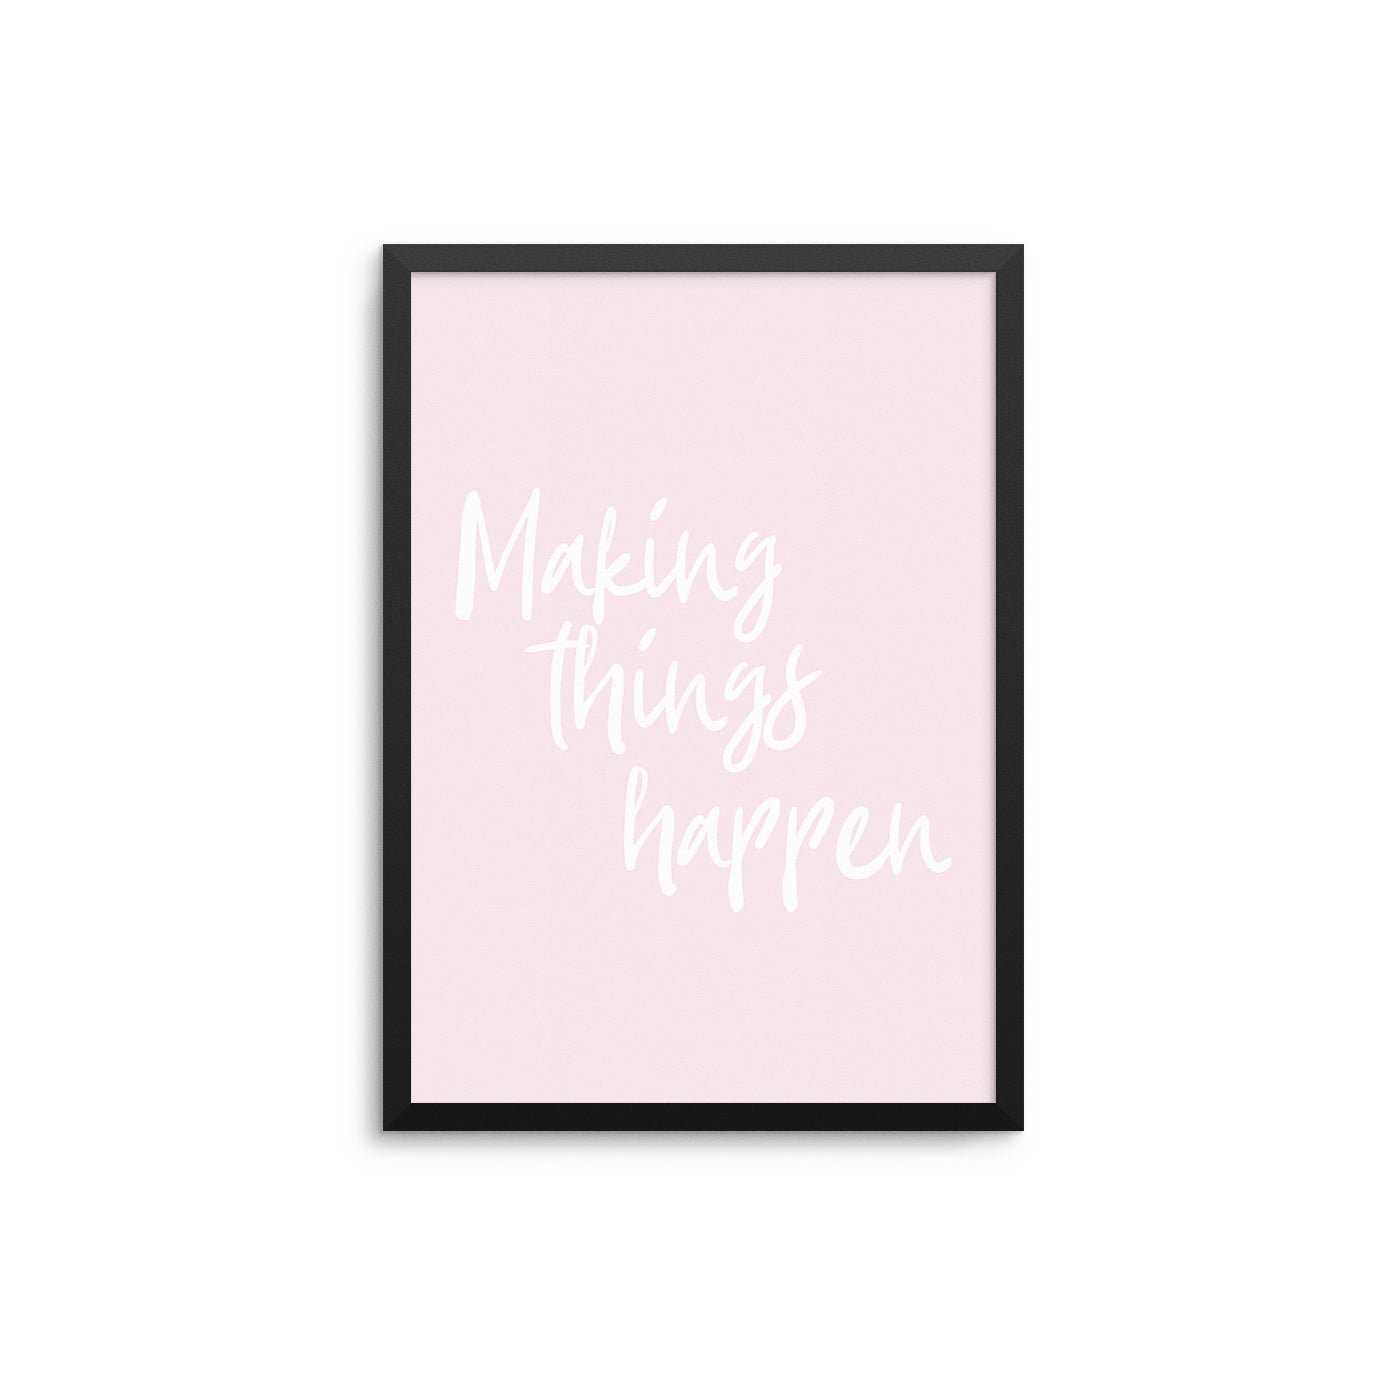 Making Things Happen - D'Luxe Prints